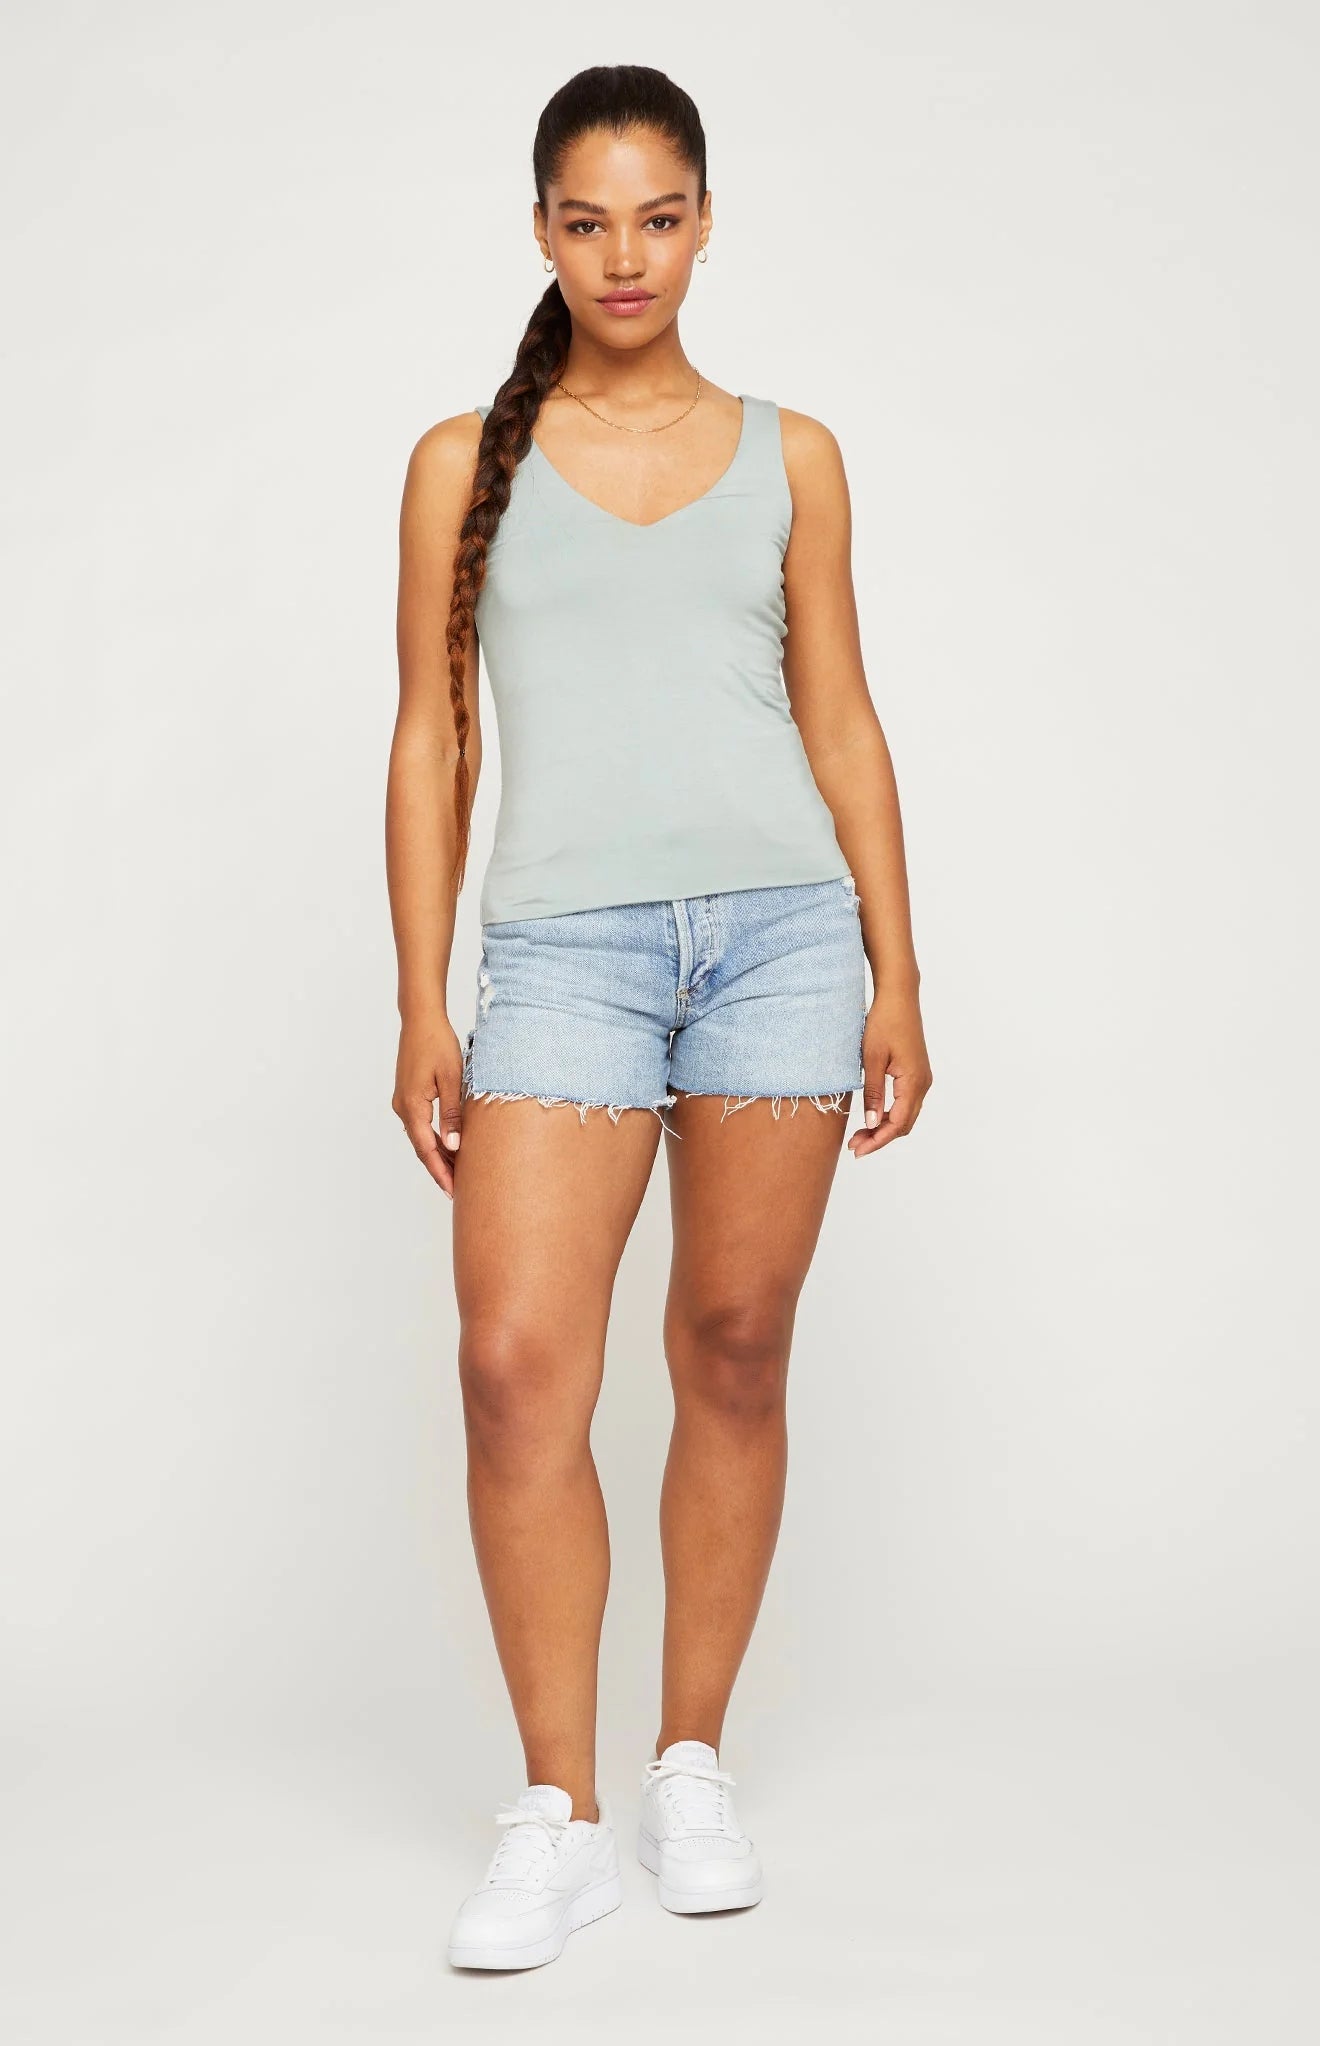 Starling Tank | Double Lined for Ultimate Comfort